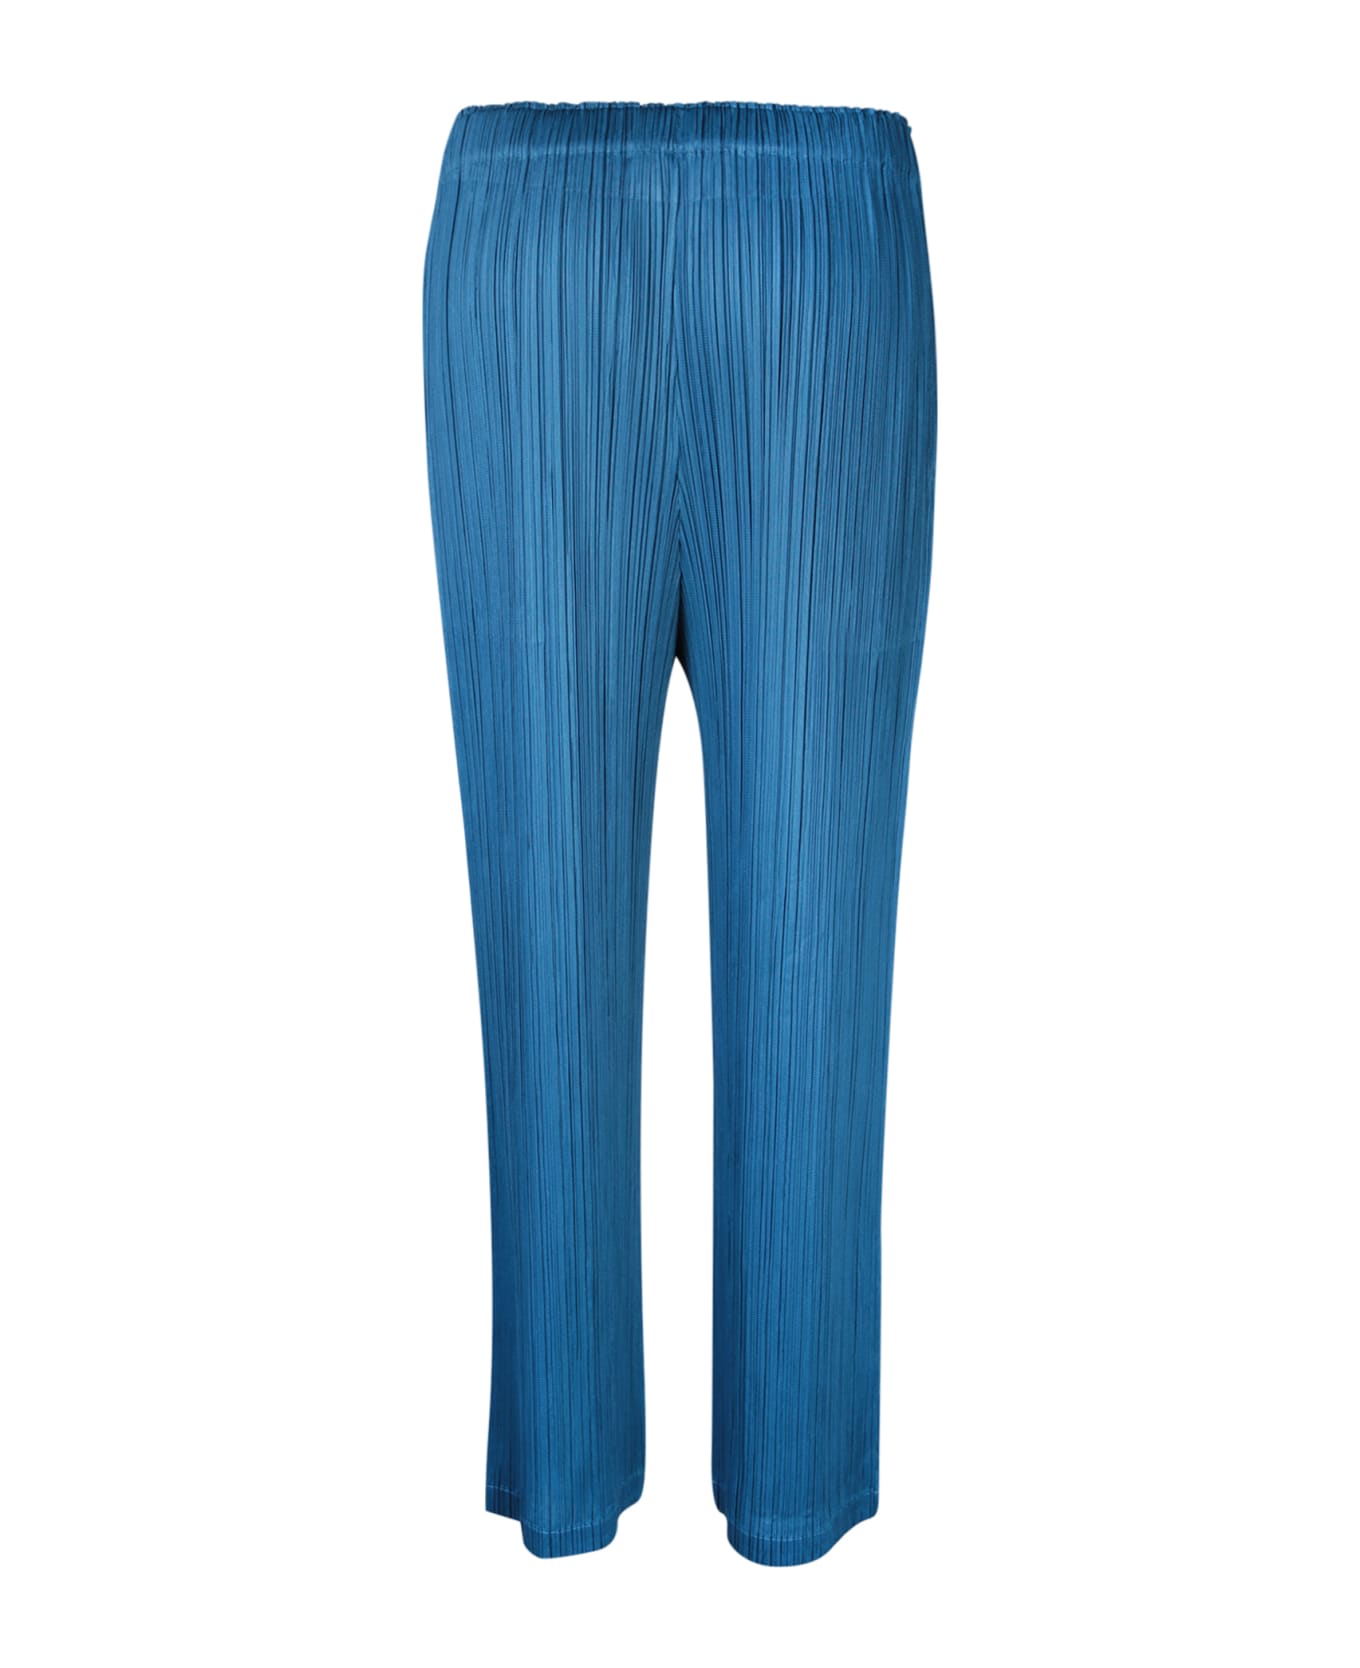 Issey Miyake Pleats Please Teal Trousers - Blue